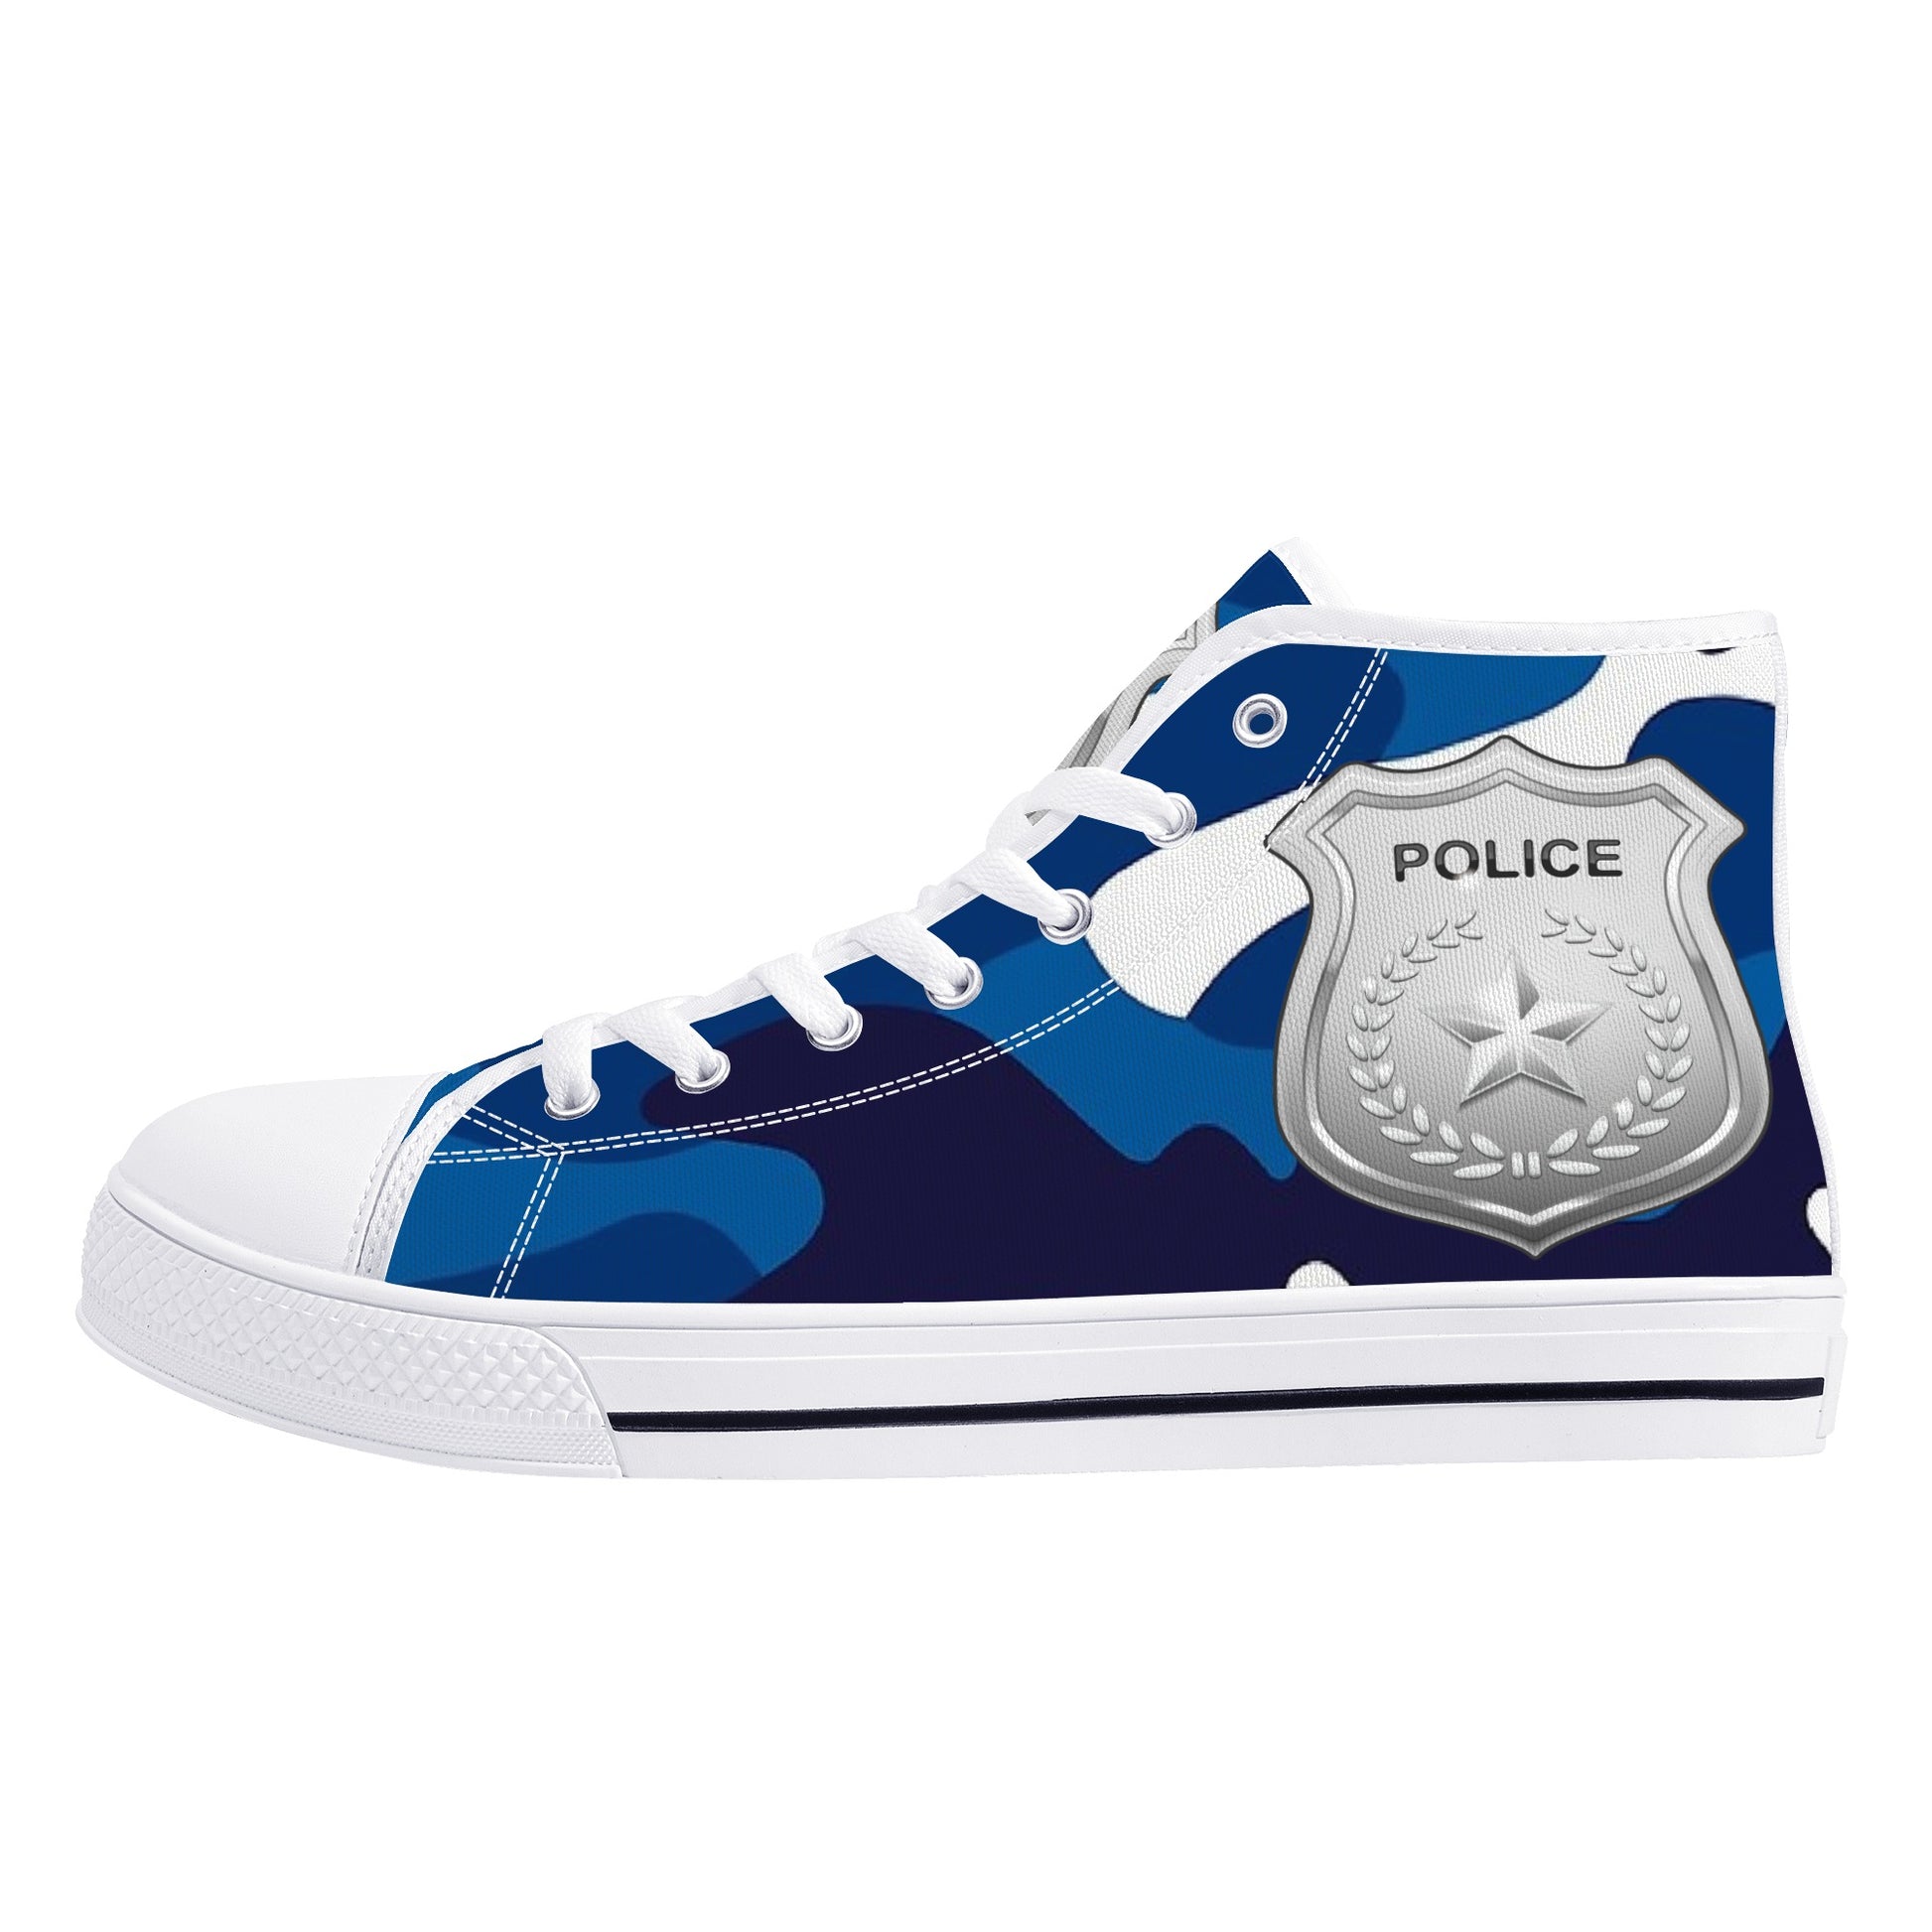 Stand out  with the  Nugget Army Poliec Womens High Top Canvas Shoes  available at Hey Nugget. Grab yours today!